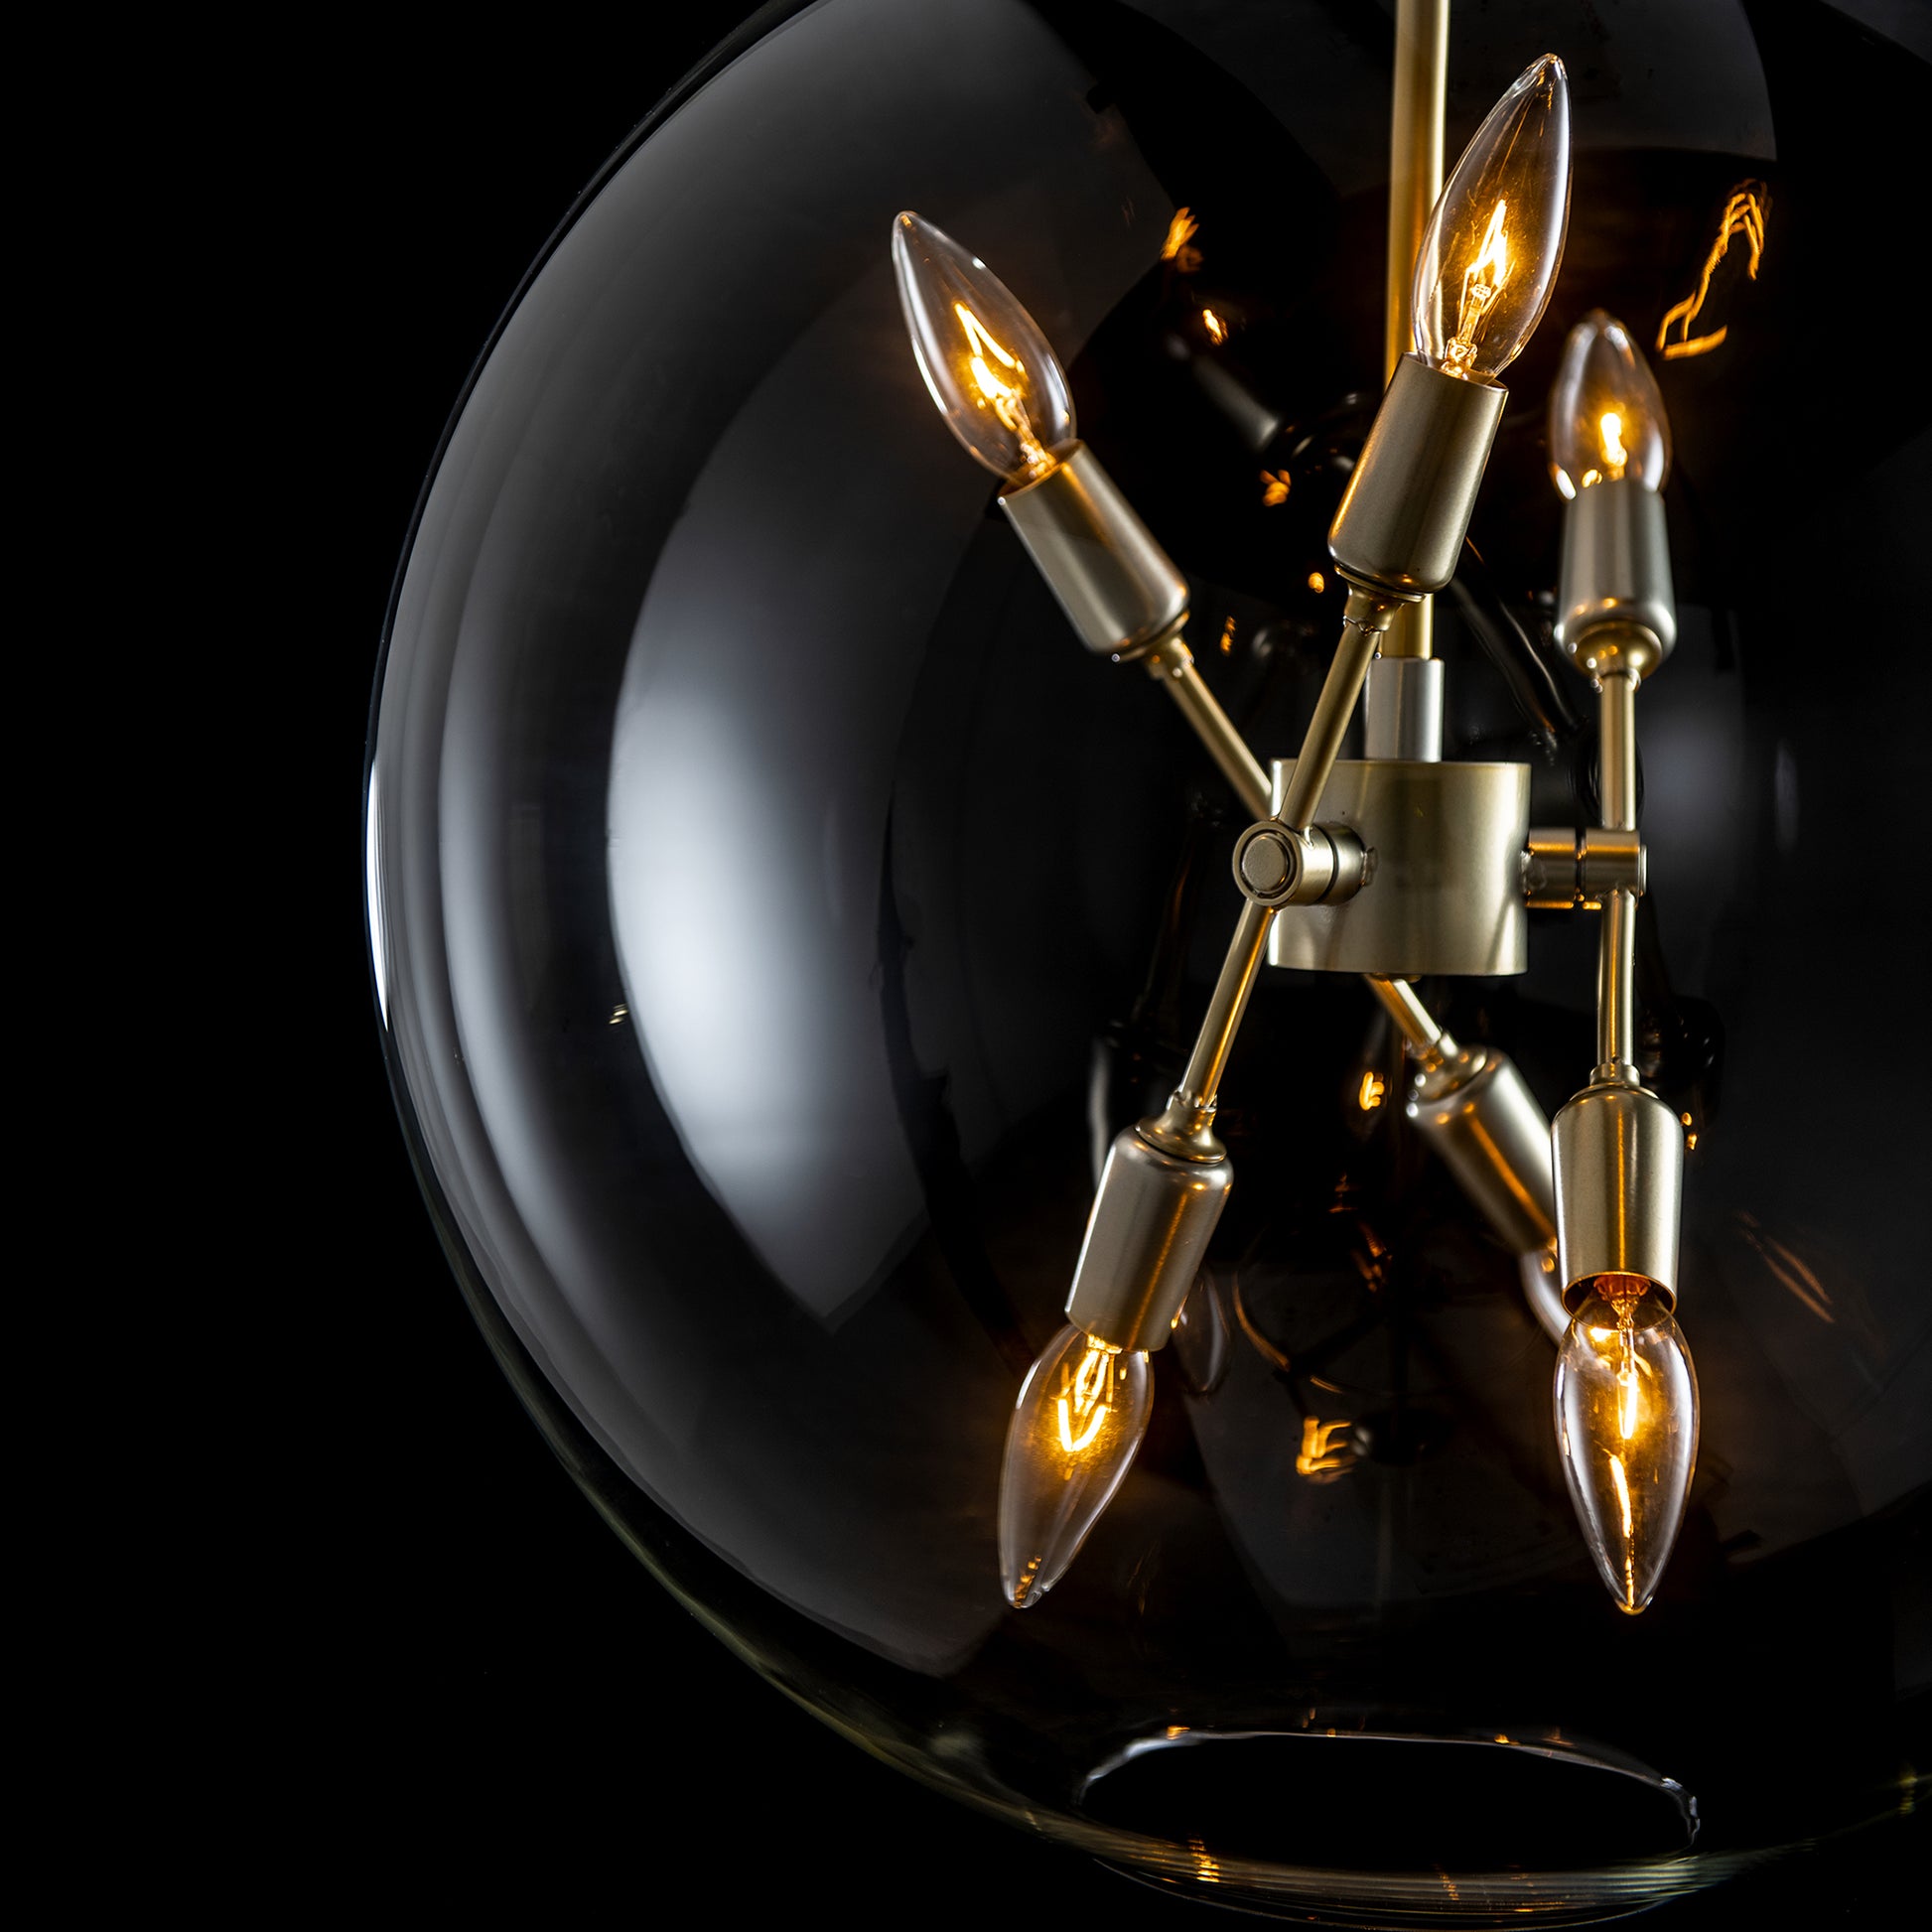 The Sfera 6-Light Pendant by Hubbardton Forge features four lights encased in a clear glass globe.